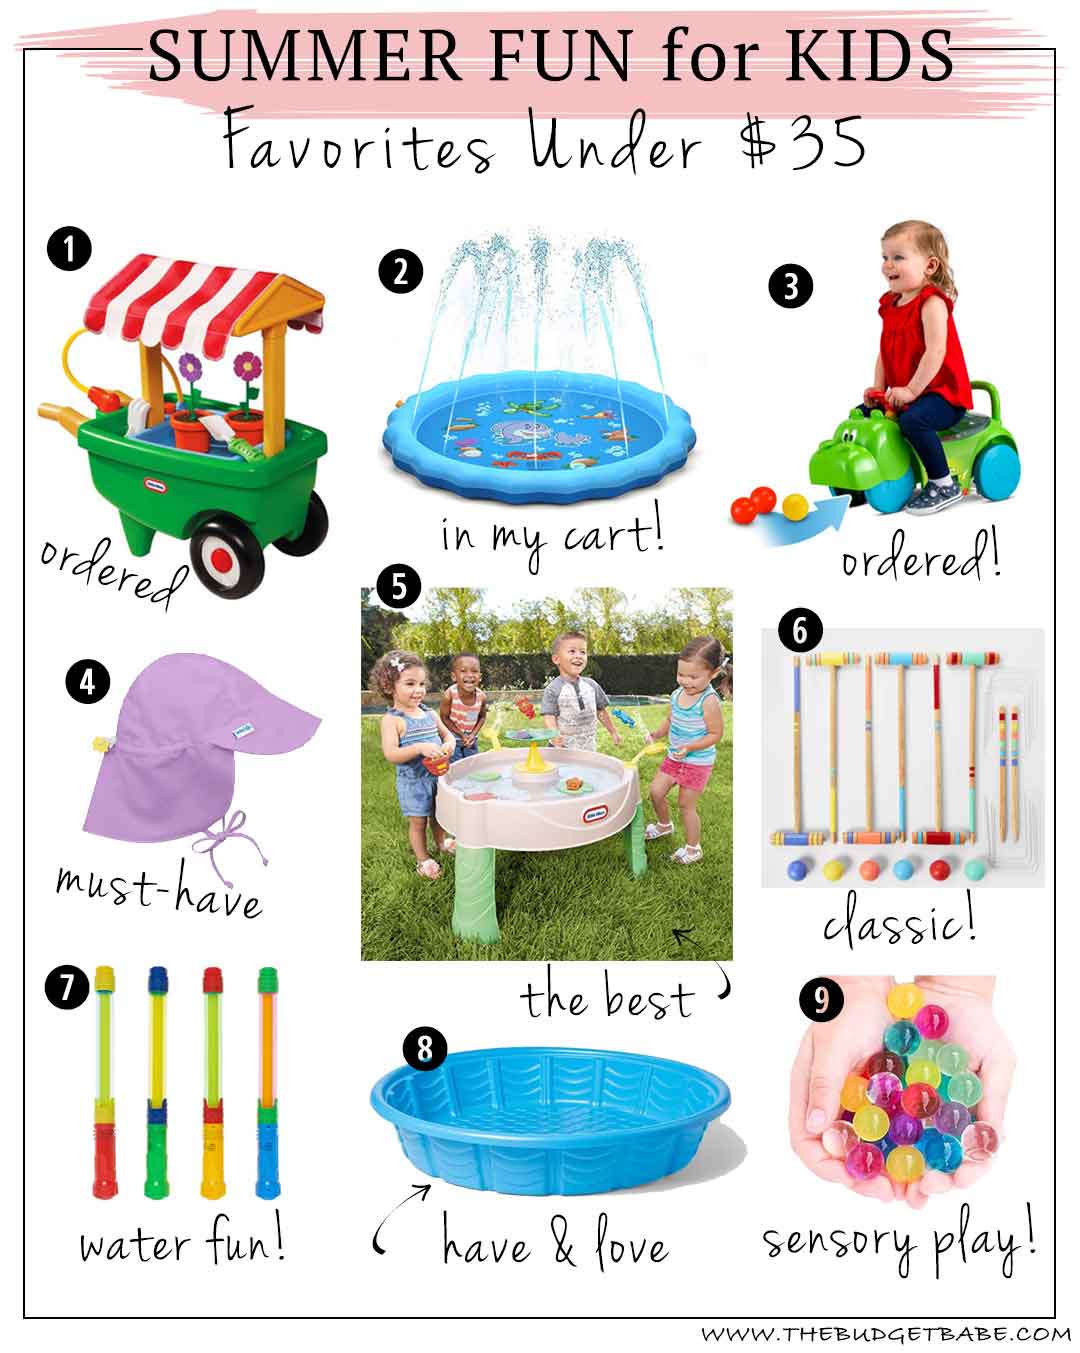 Best Summer Toys for Kids Under $35! Summer fun doesn't have to cost a lot